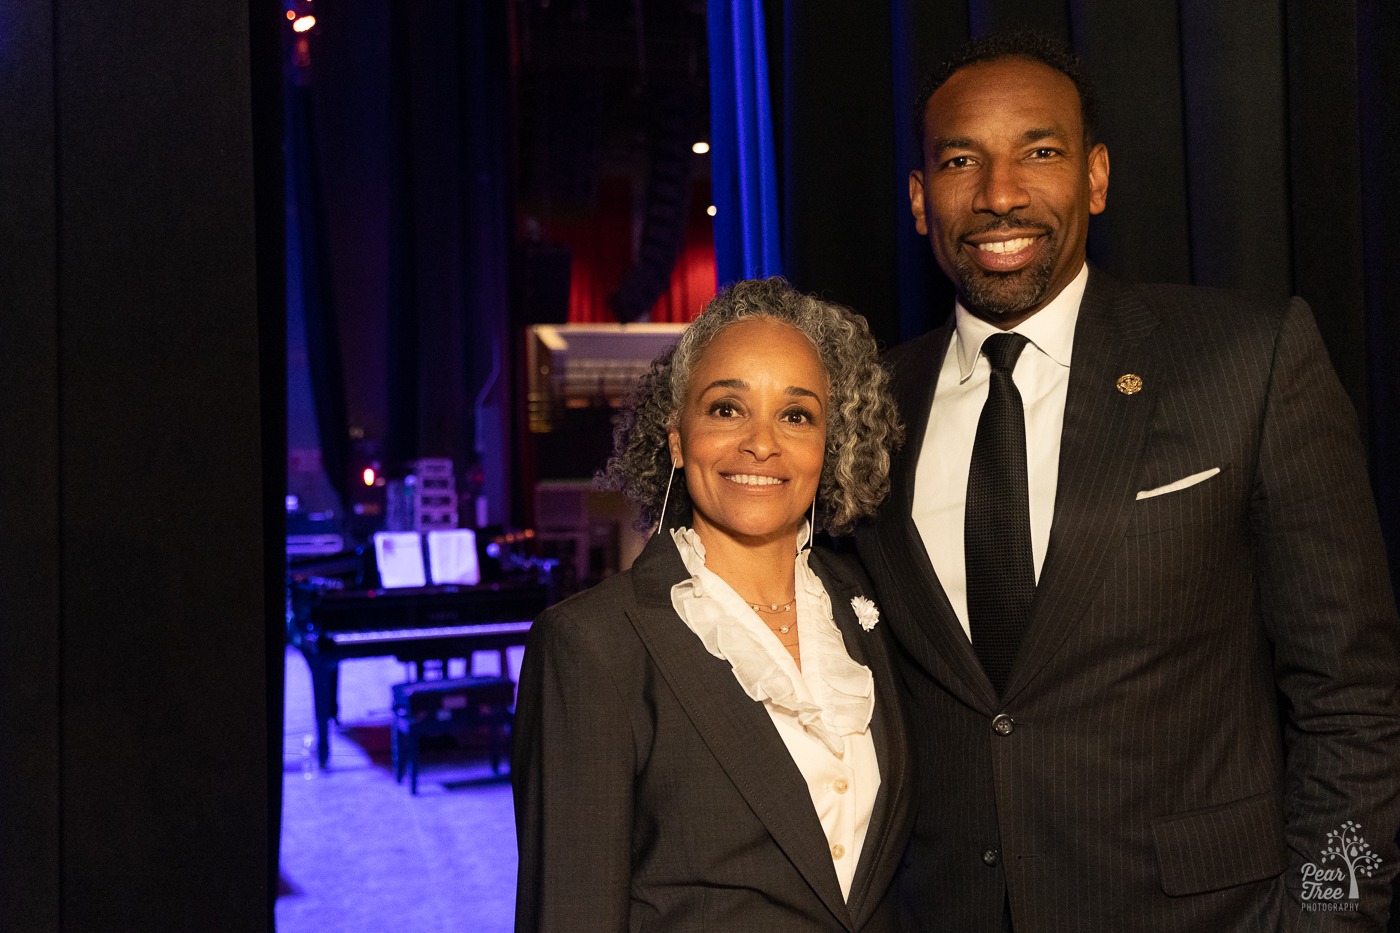 Dr. Alie Redd and Atlanta Mayor Andre Dickens standing together backstage at the Coca Cola Roxy